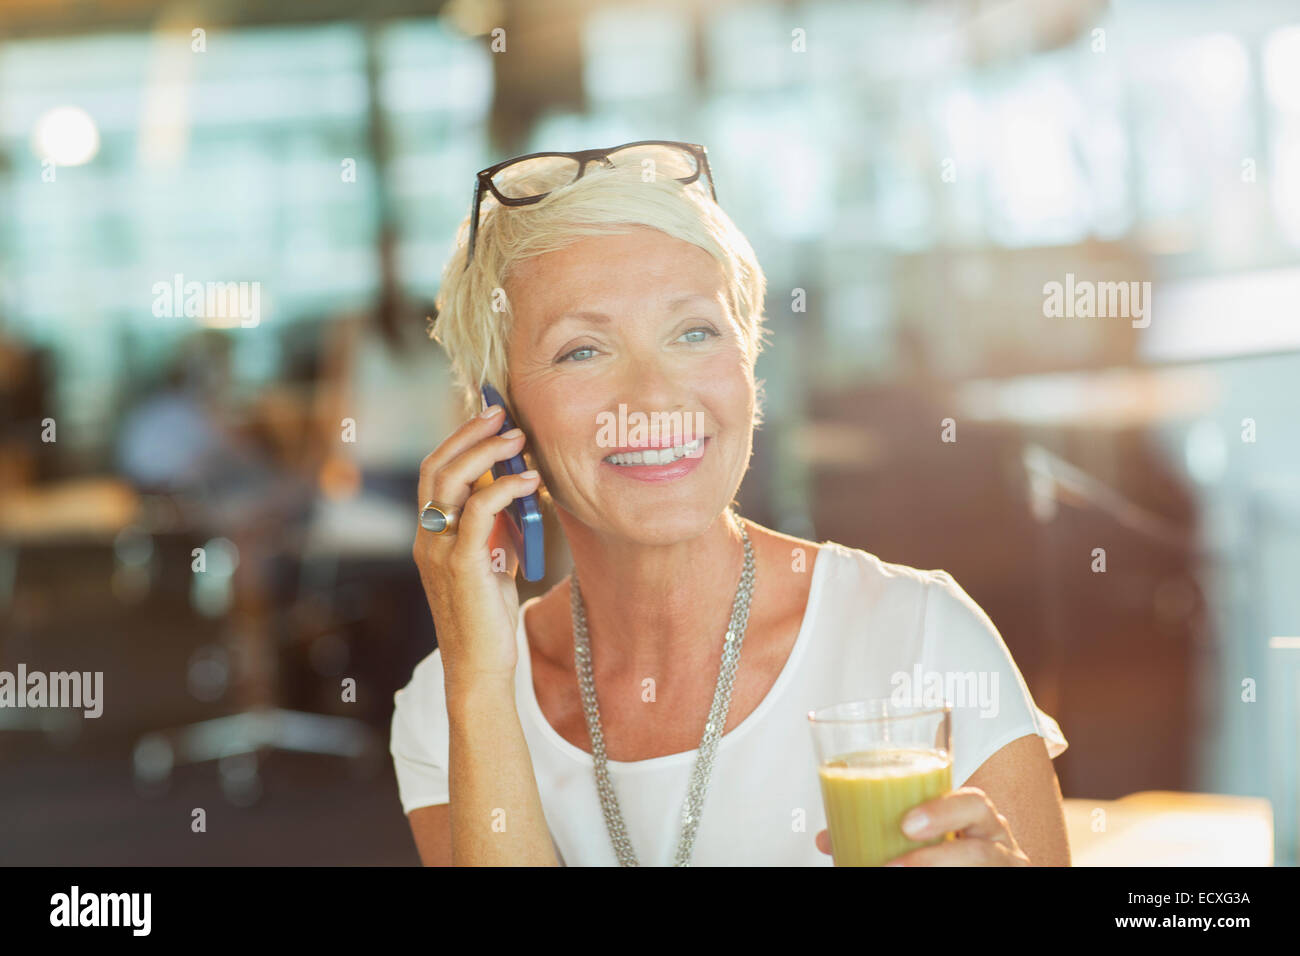 Businesswoman talking on cell phone in office Stock Photo